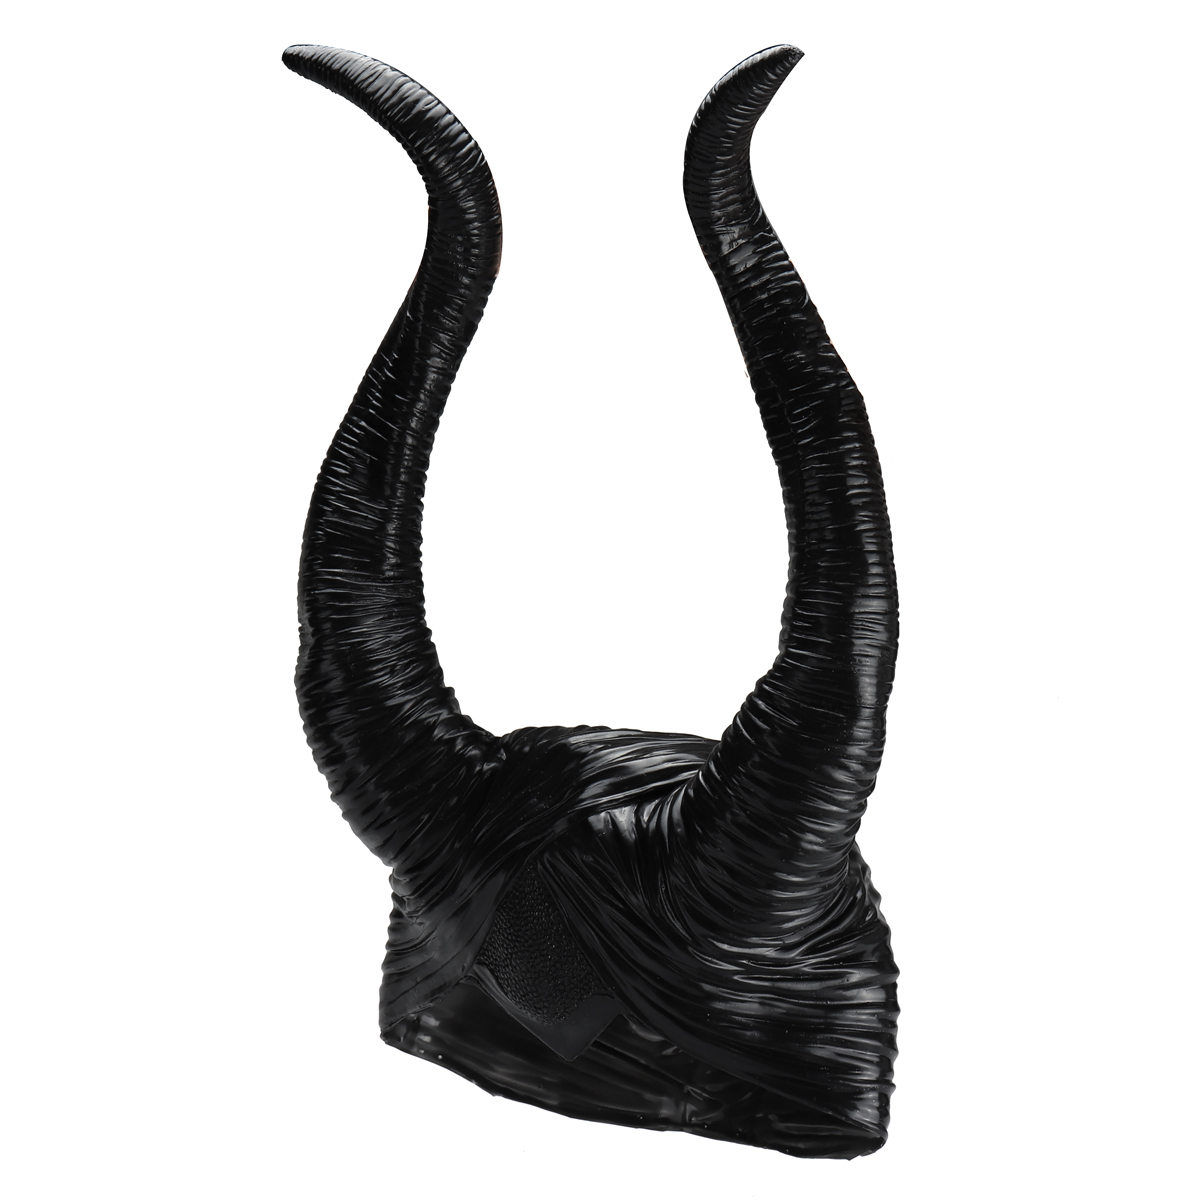 Black-Horns-Halloween-Party-Costume-Witch-Headgear-Cosplay-1347613